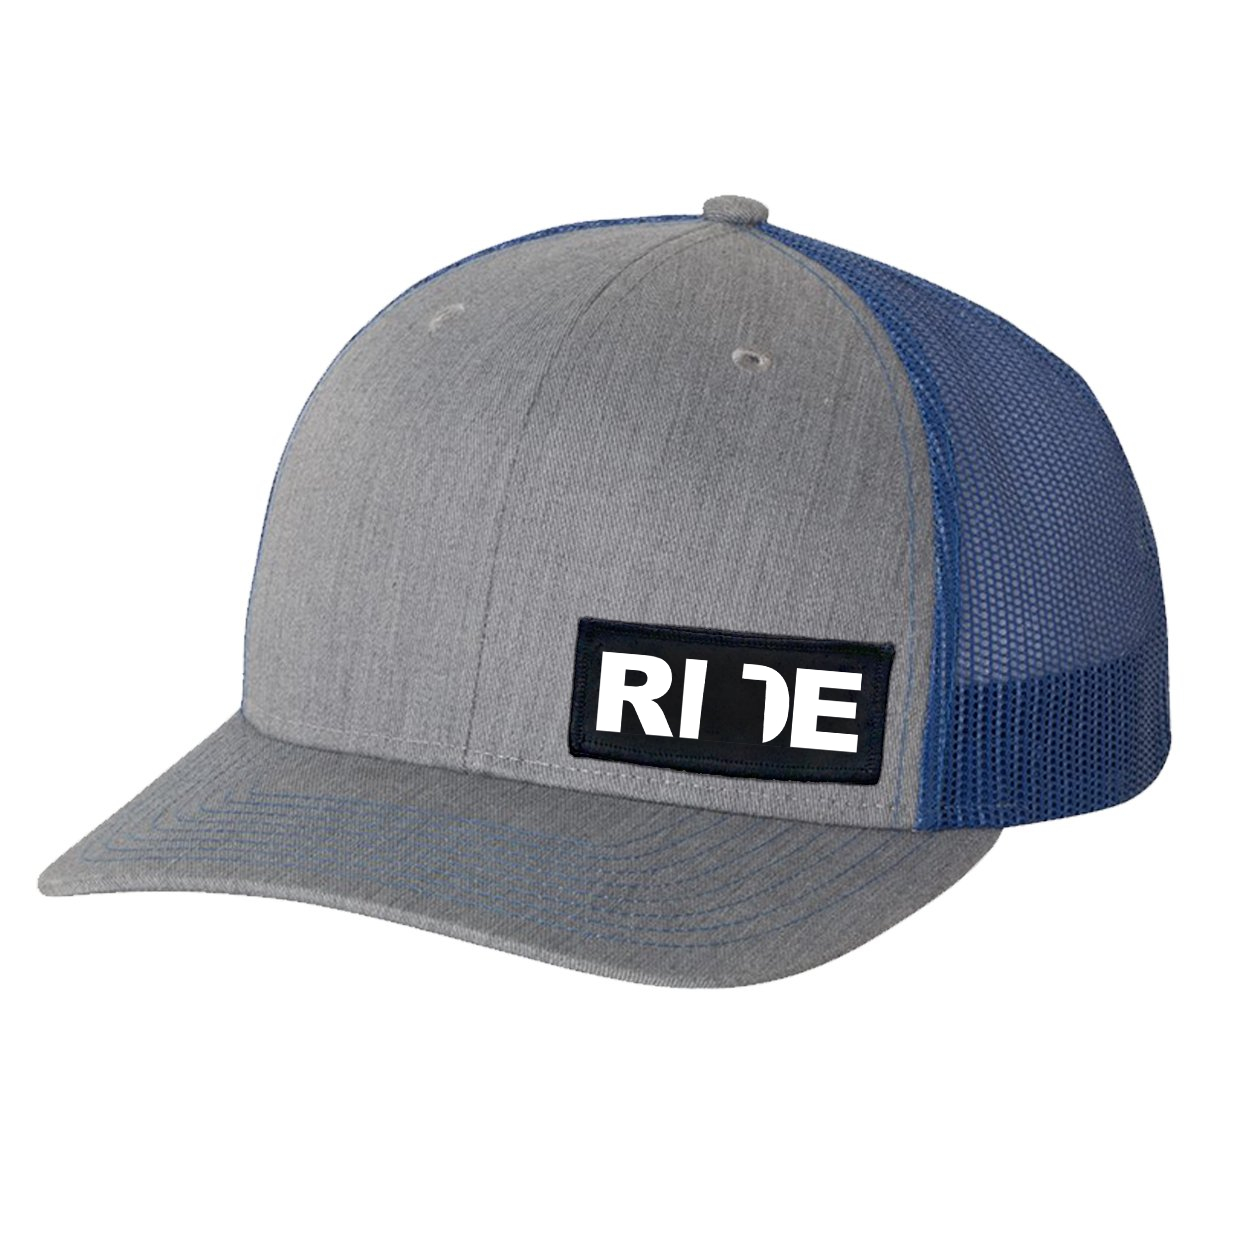 Ride Utah Night Out Woven Patch Snapback Trucker Hat Heather Grey/Royal (White Logo)